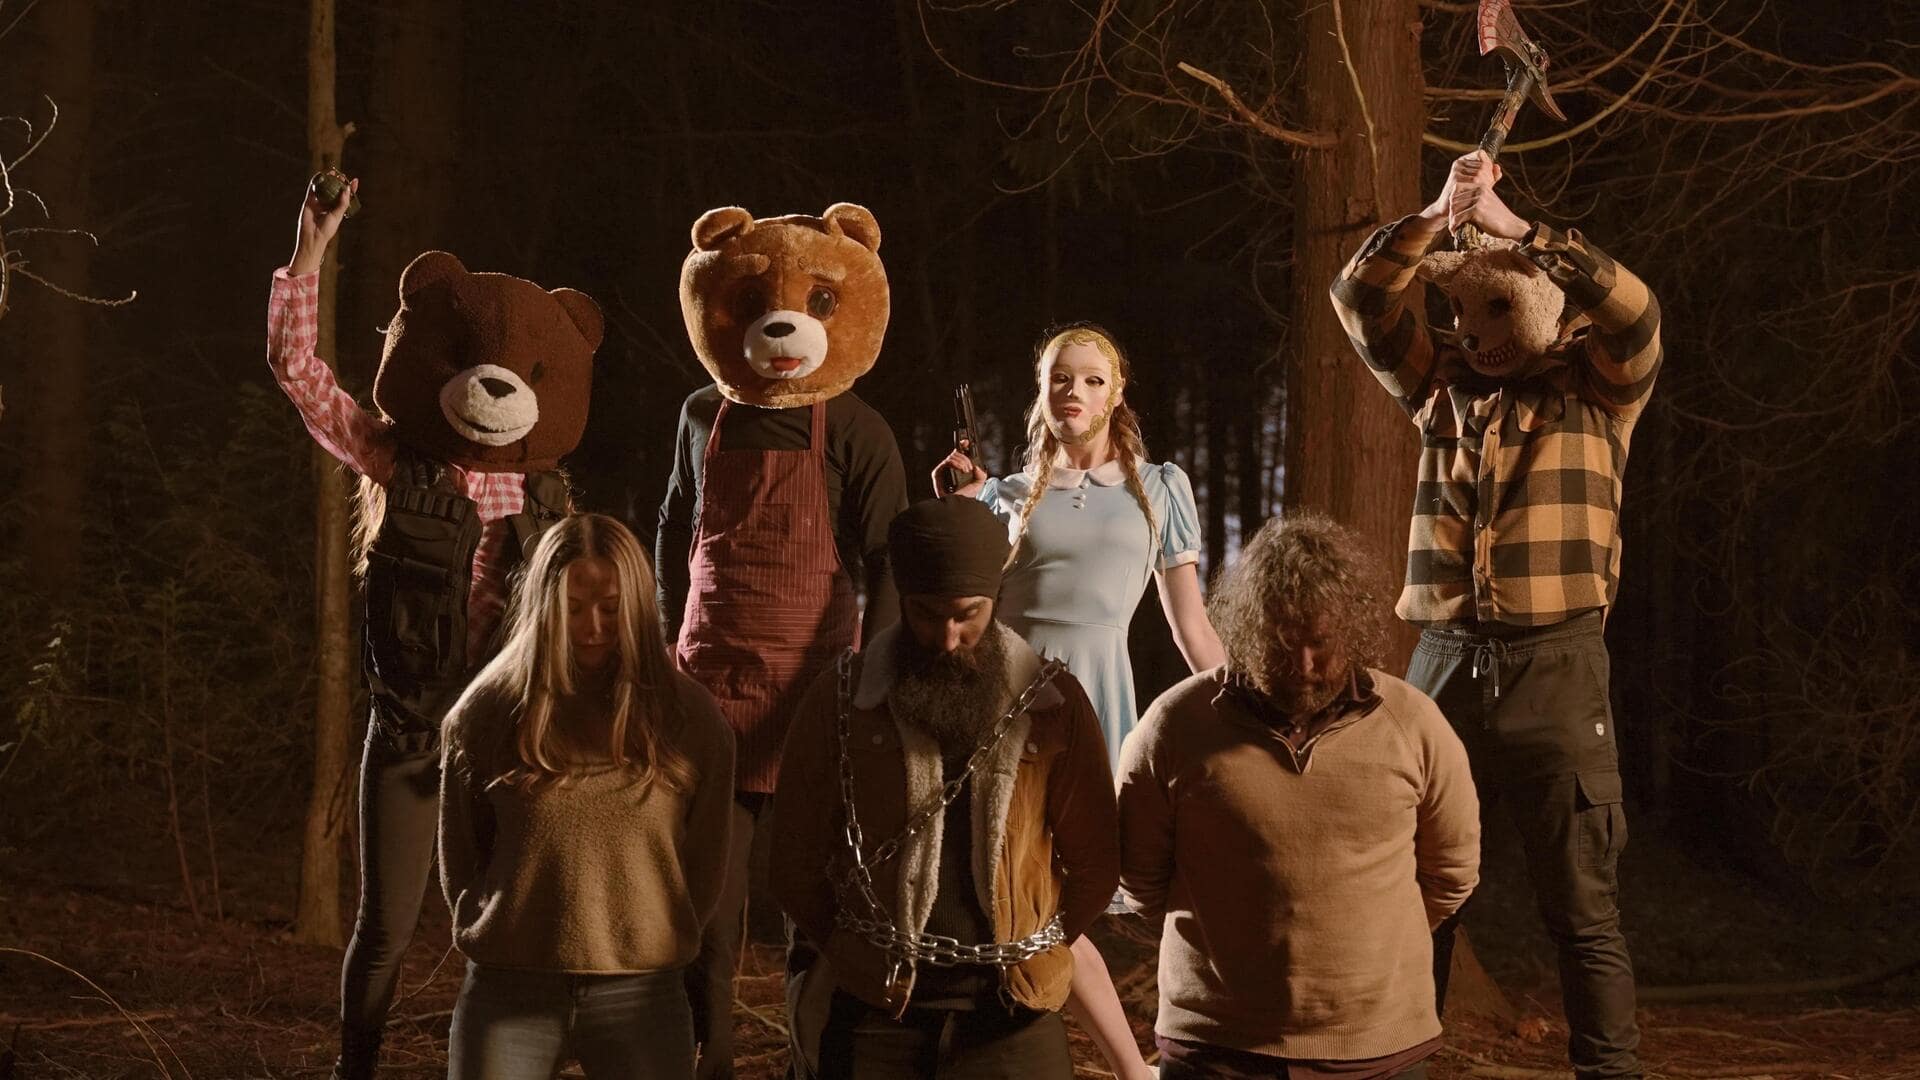 'Goldilocks and the Three Bears' secures multiple sales at EFM